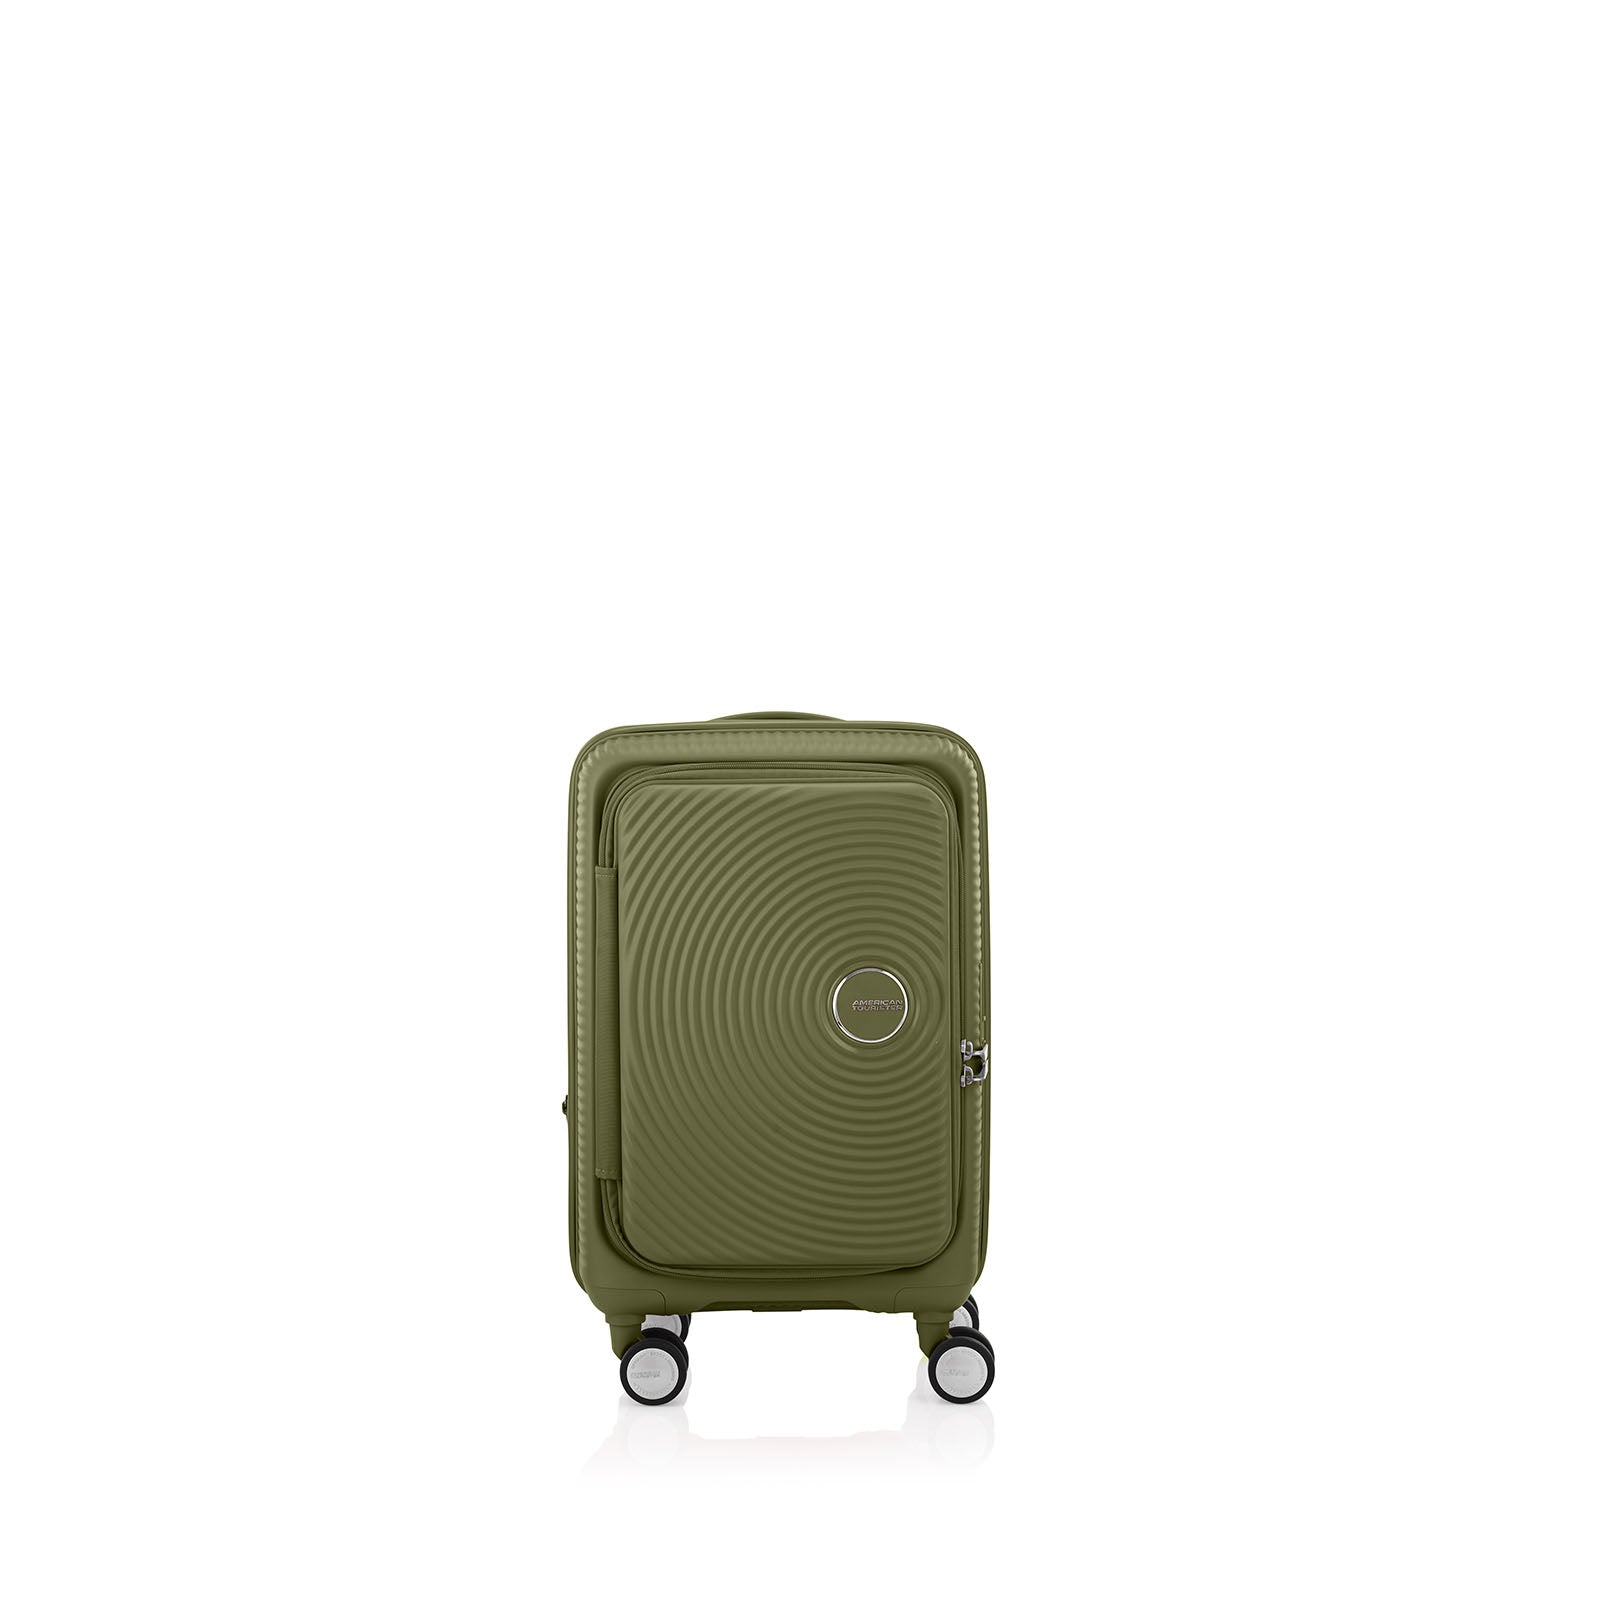 American-Tourister-Curio-Book-Opening-55cm-Carry-On-Suitcase-Khaki-Front